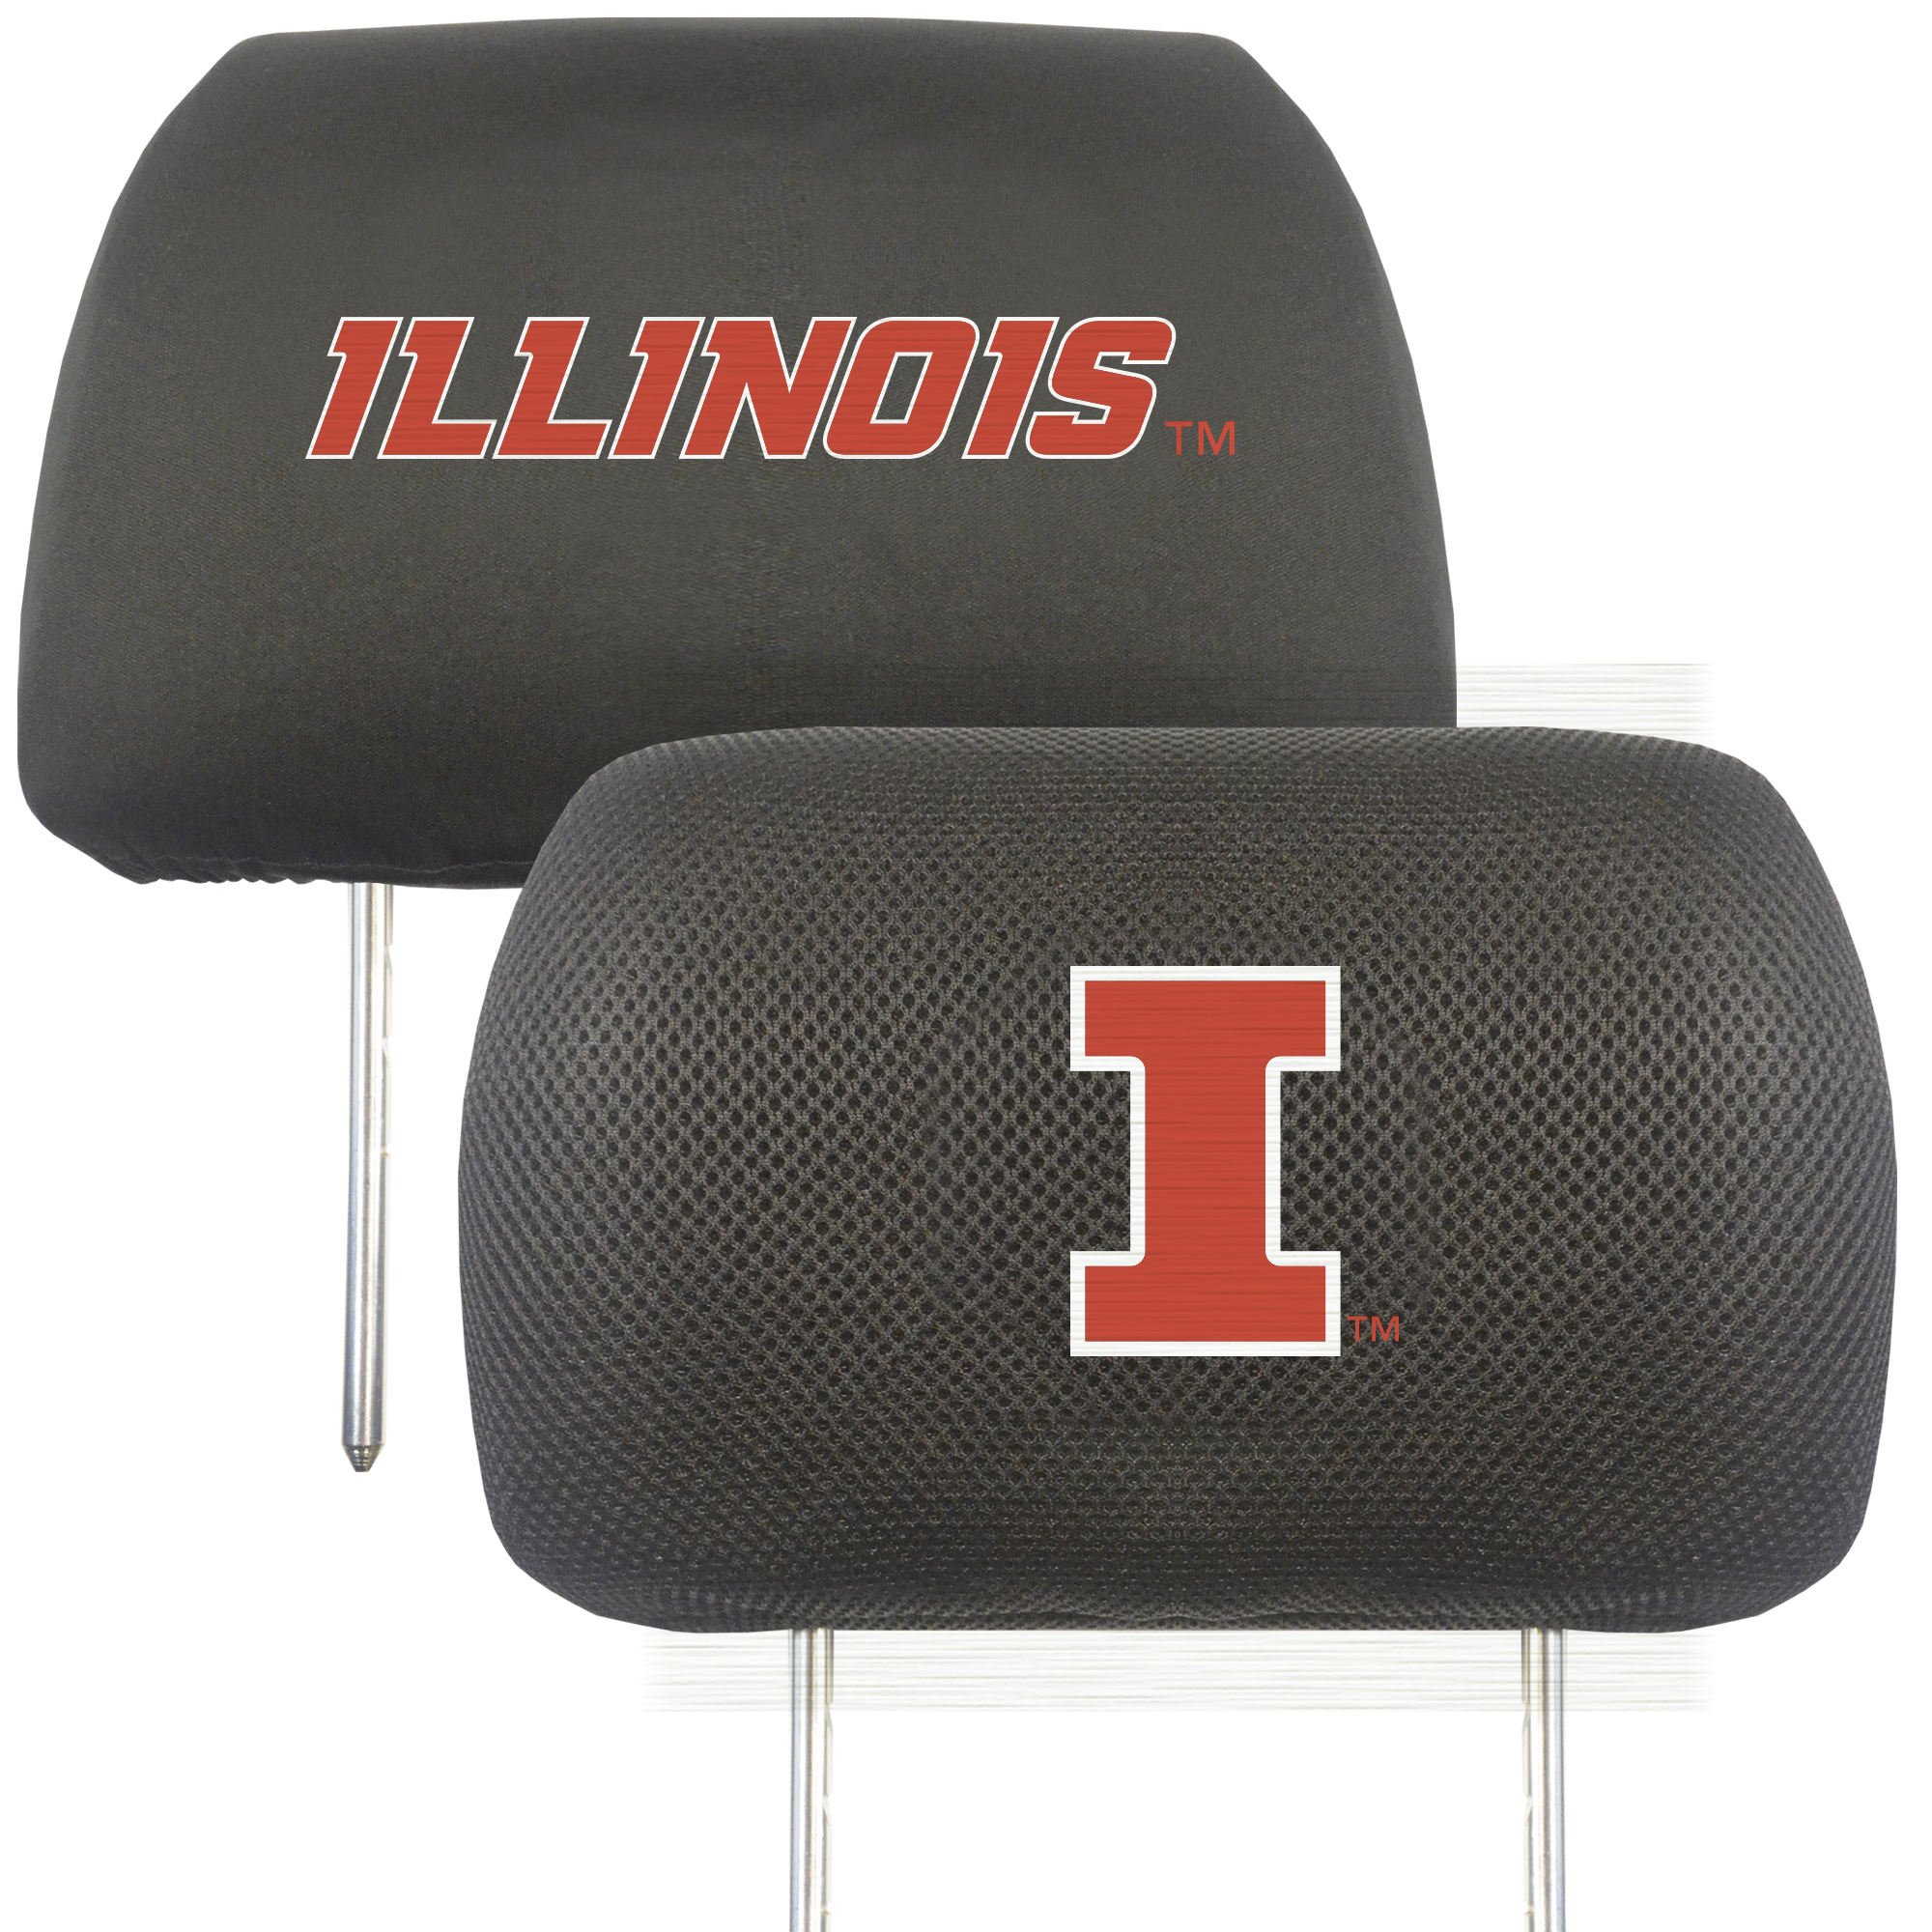 Illinois Fighting Illini Headrest Covers FanMats Special Order